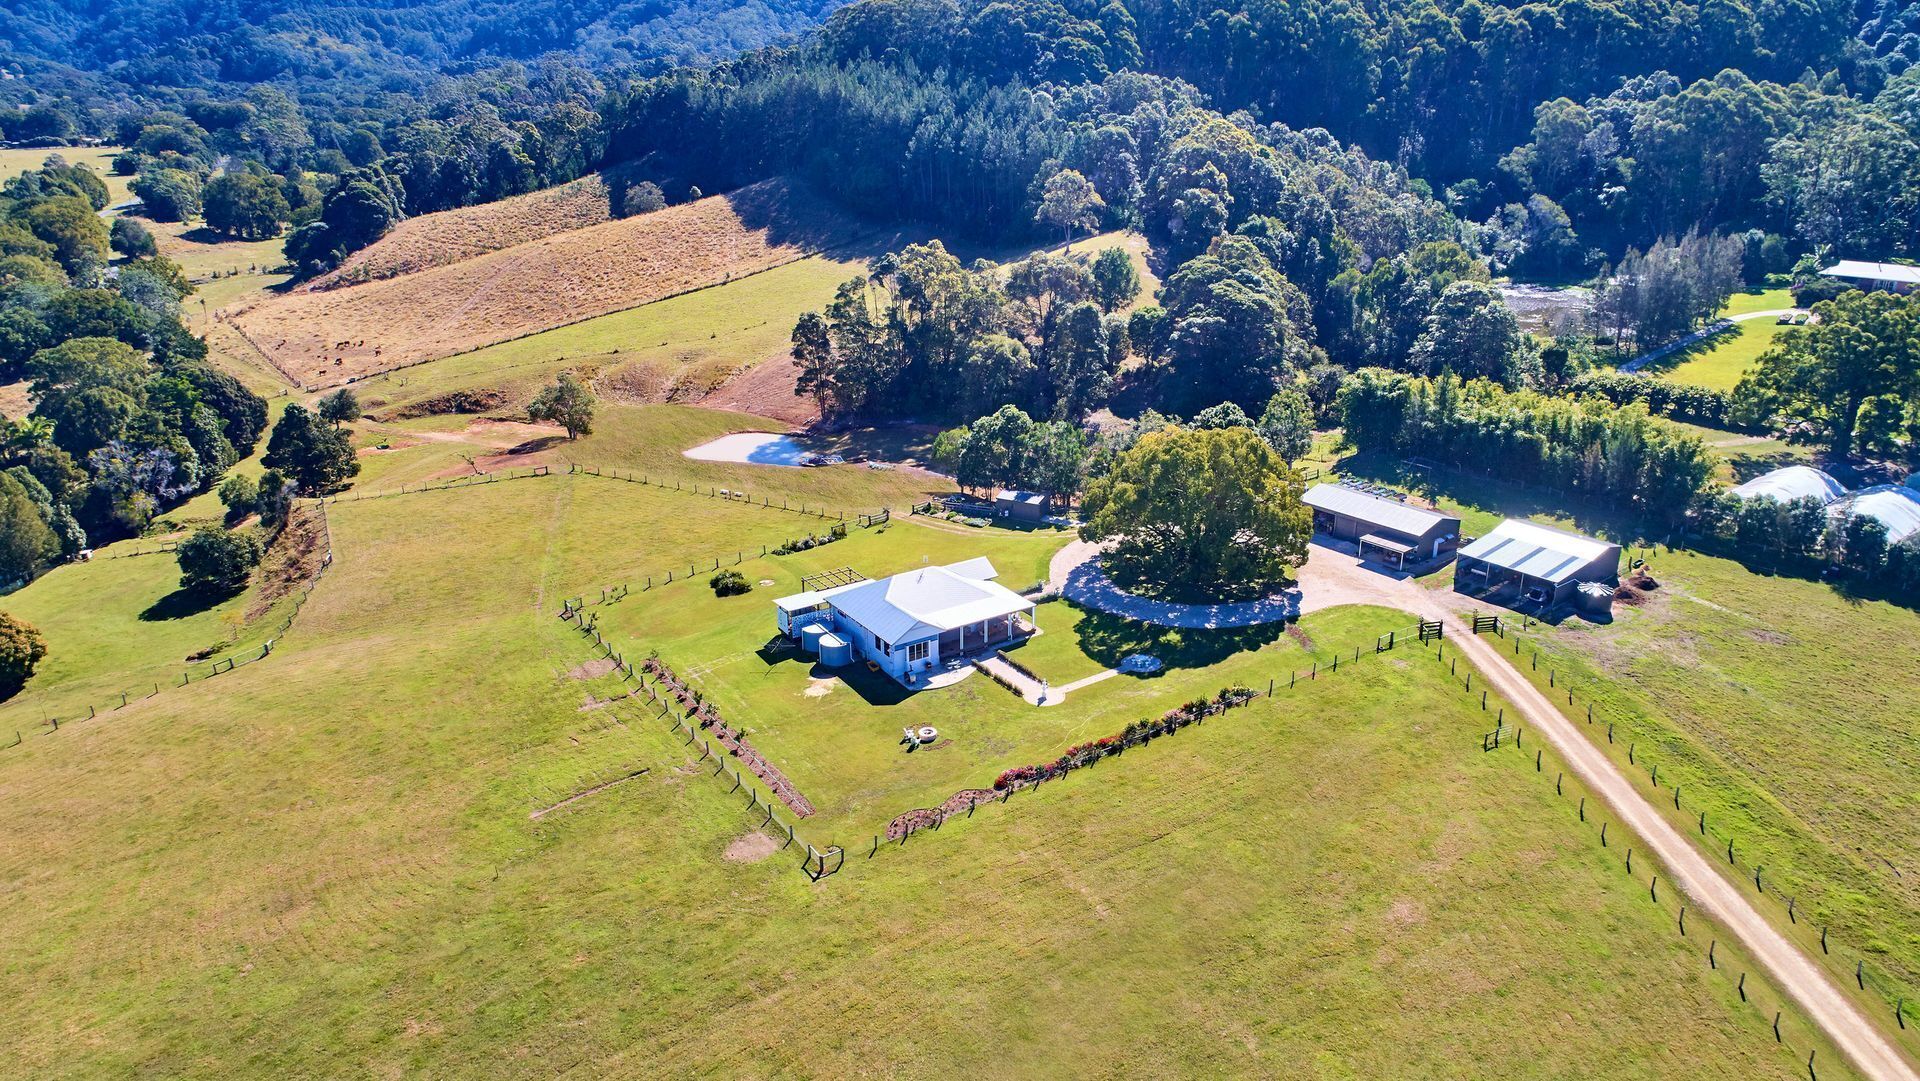 Self Contained Farm Retreat, Spa, Wood Fired Pizza Oven, Fire Pit, BBQ